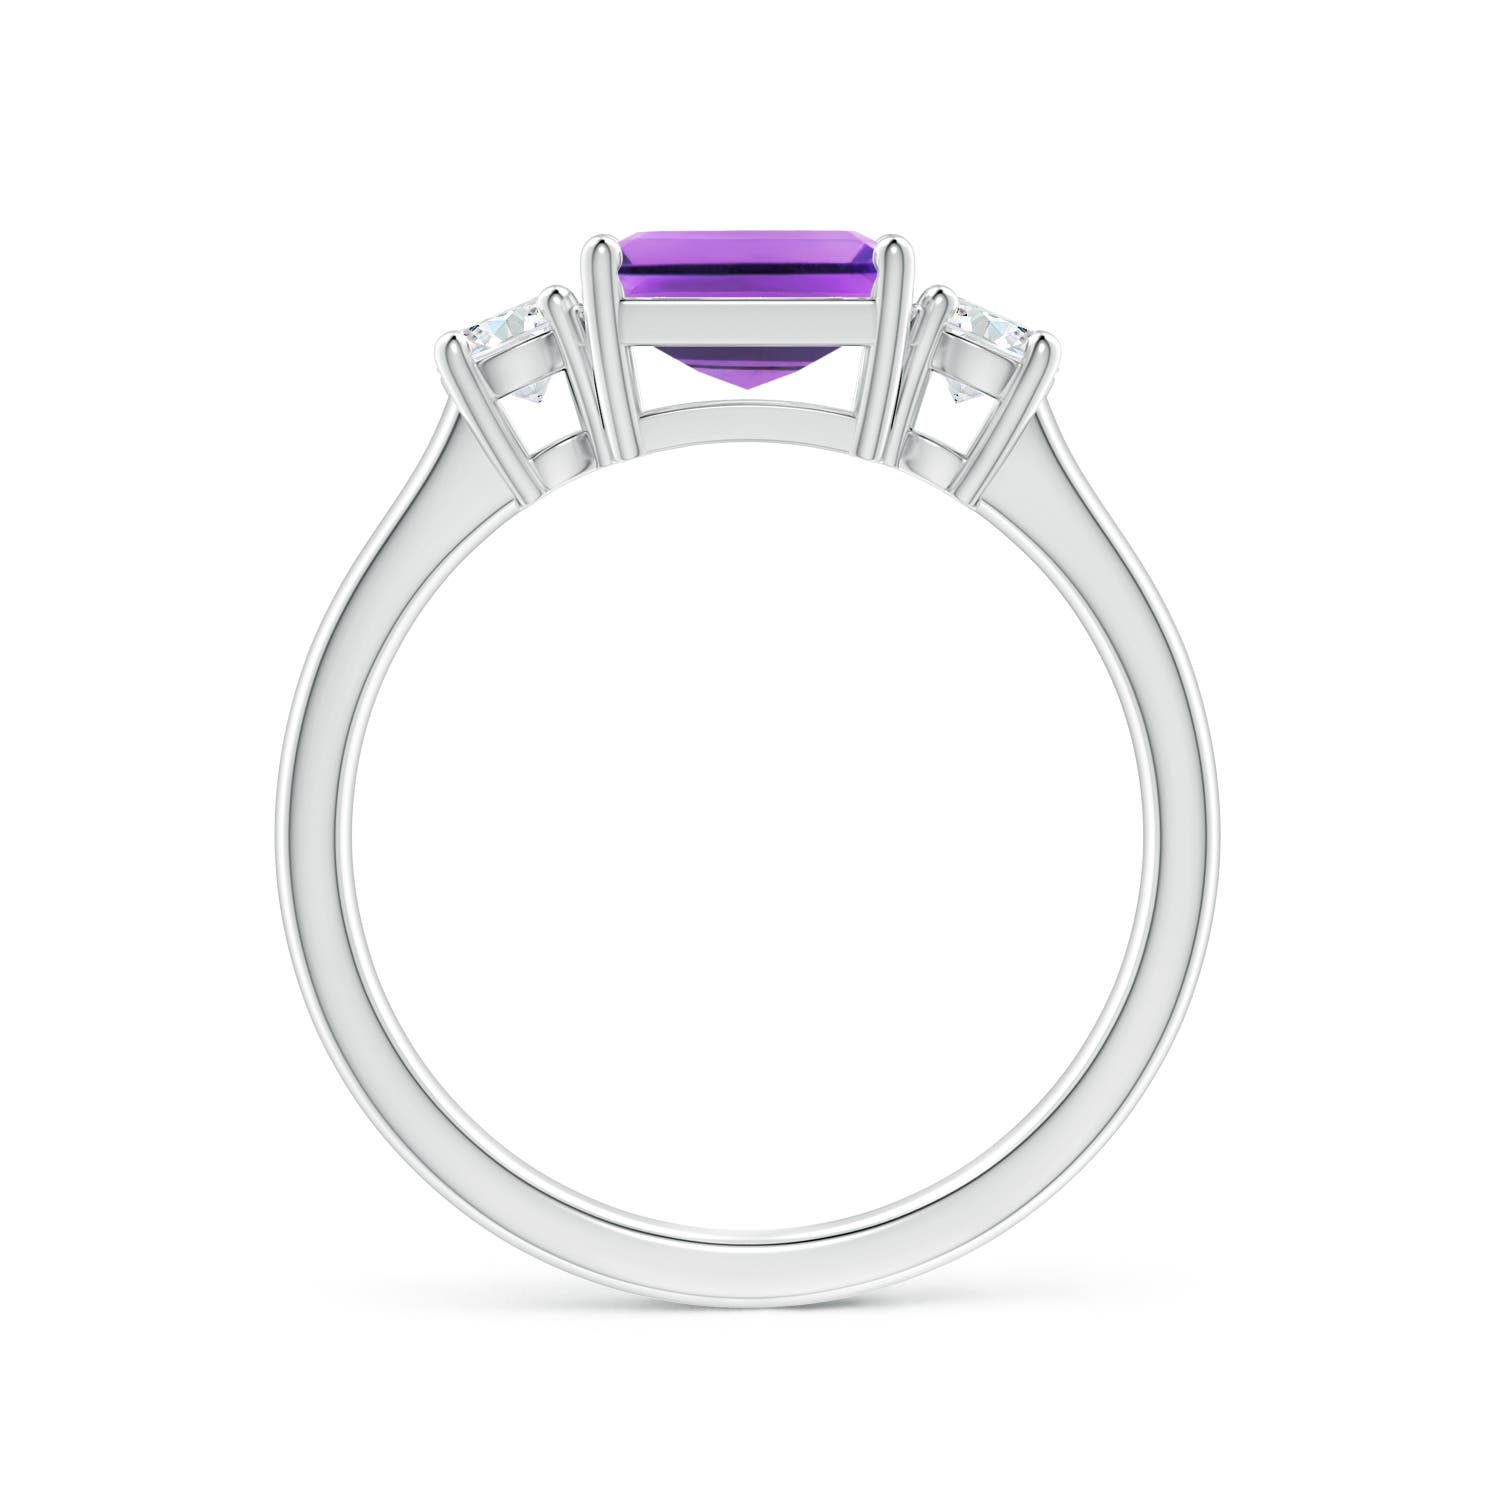 AA - Amethyst / 1.62 CT / 14 KT White Gold